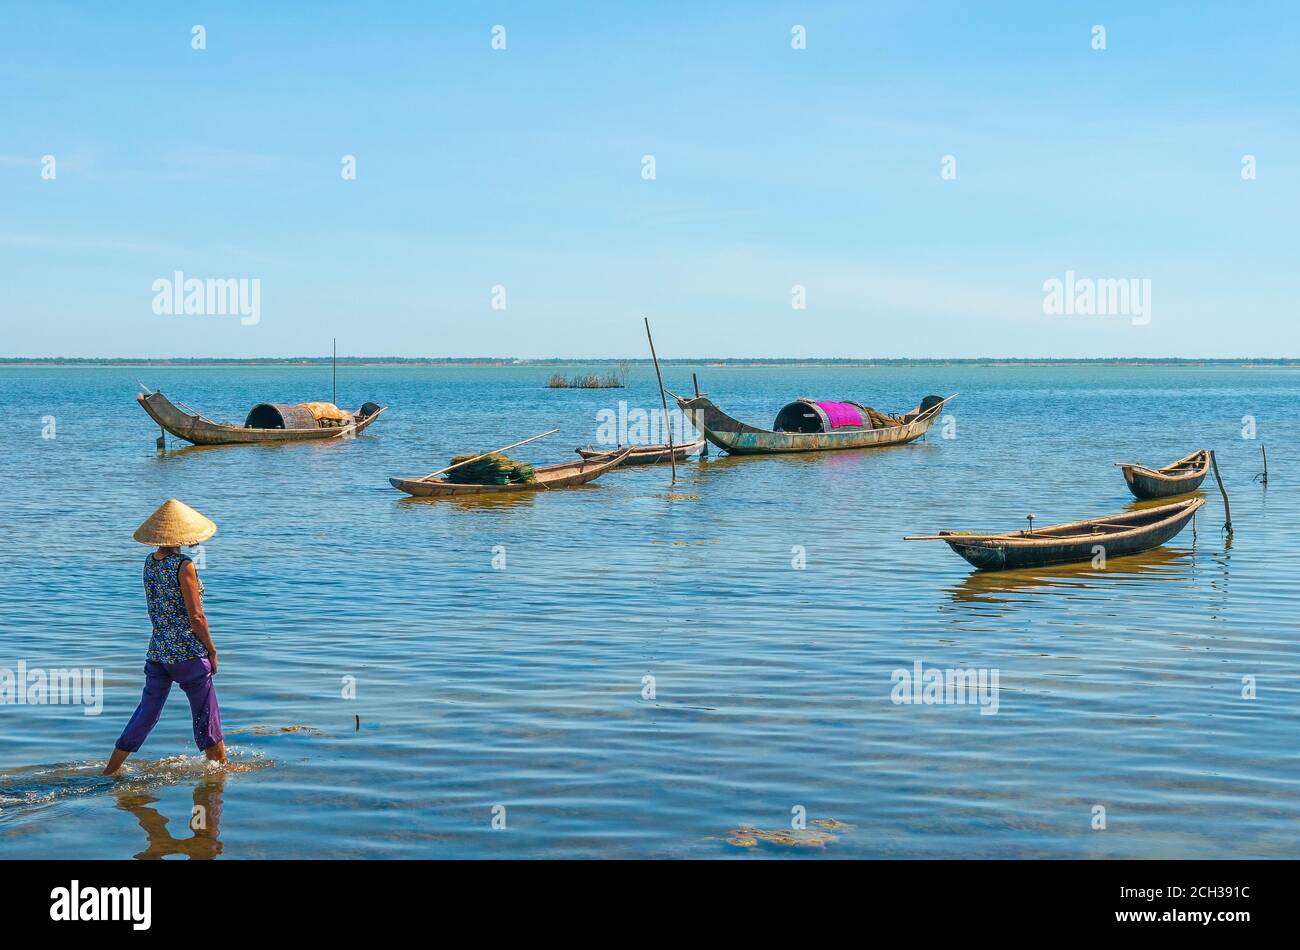 Vietnamese woman with conical hat walking towards fishing boats between Hoi An and Hue, Central Vietnam, Asia. Stock Photo